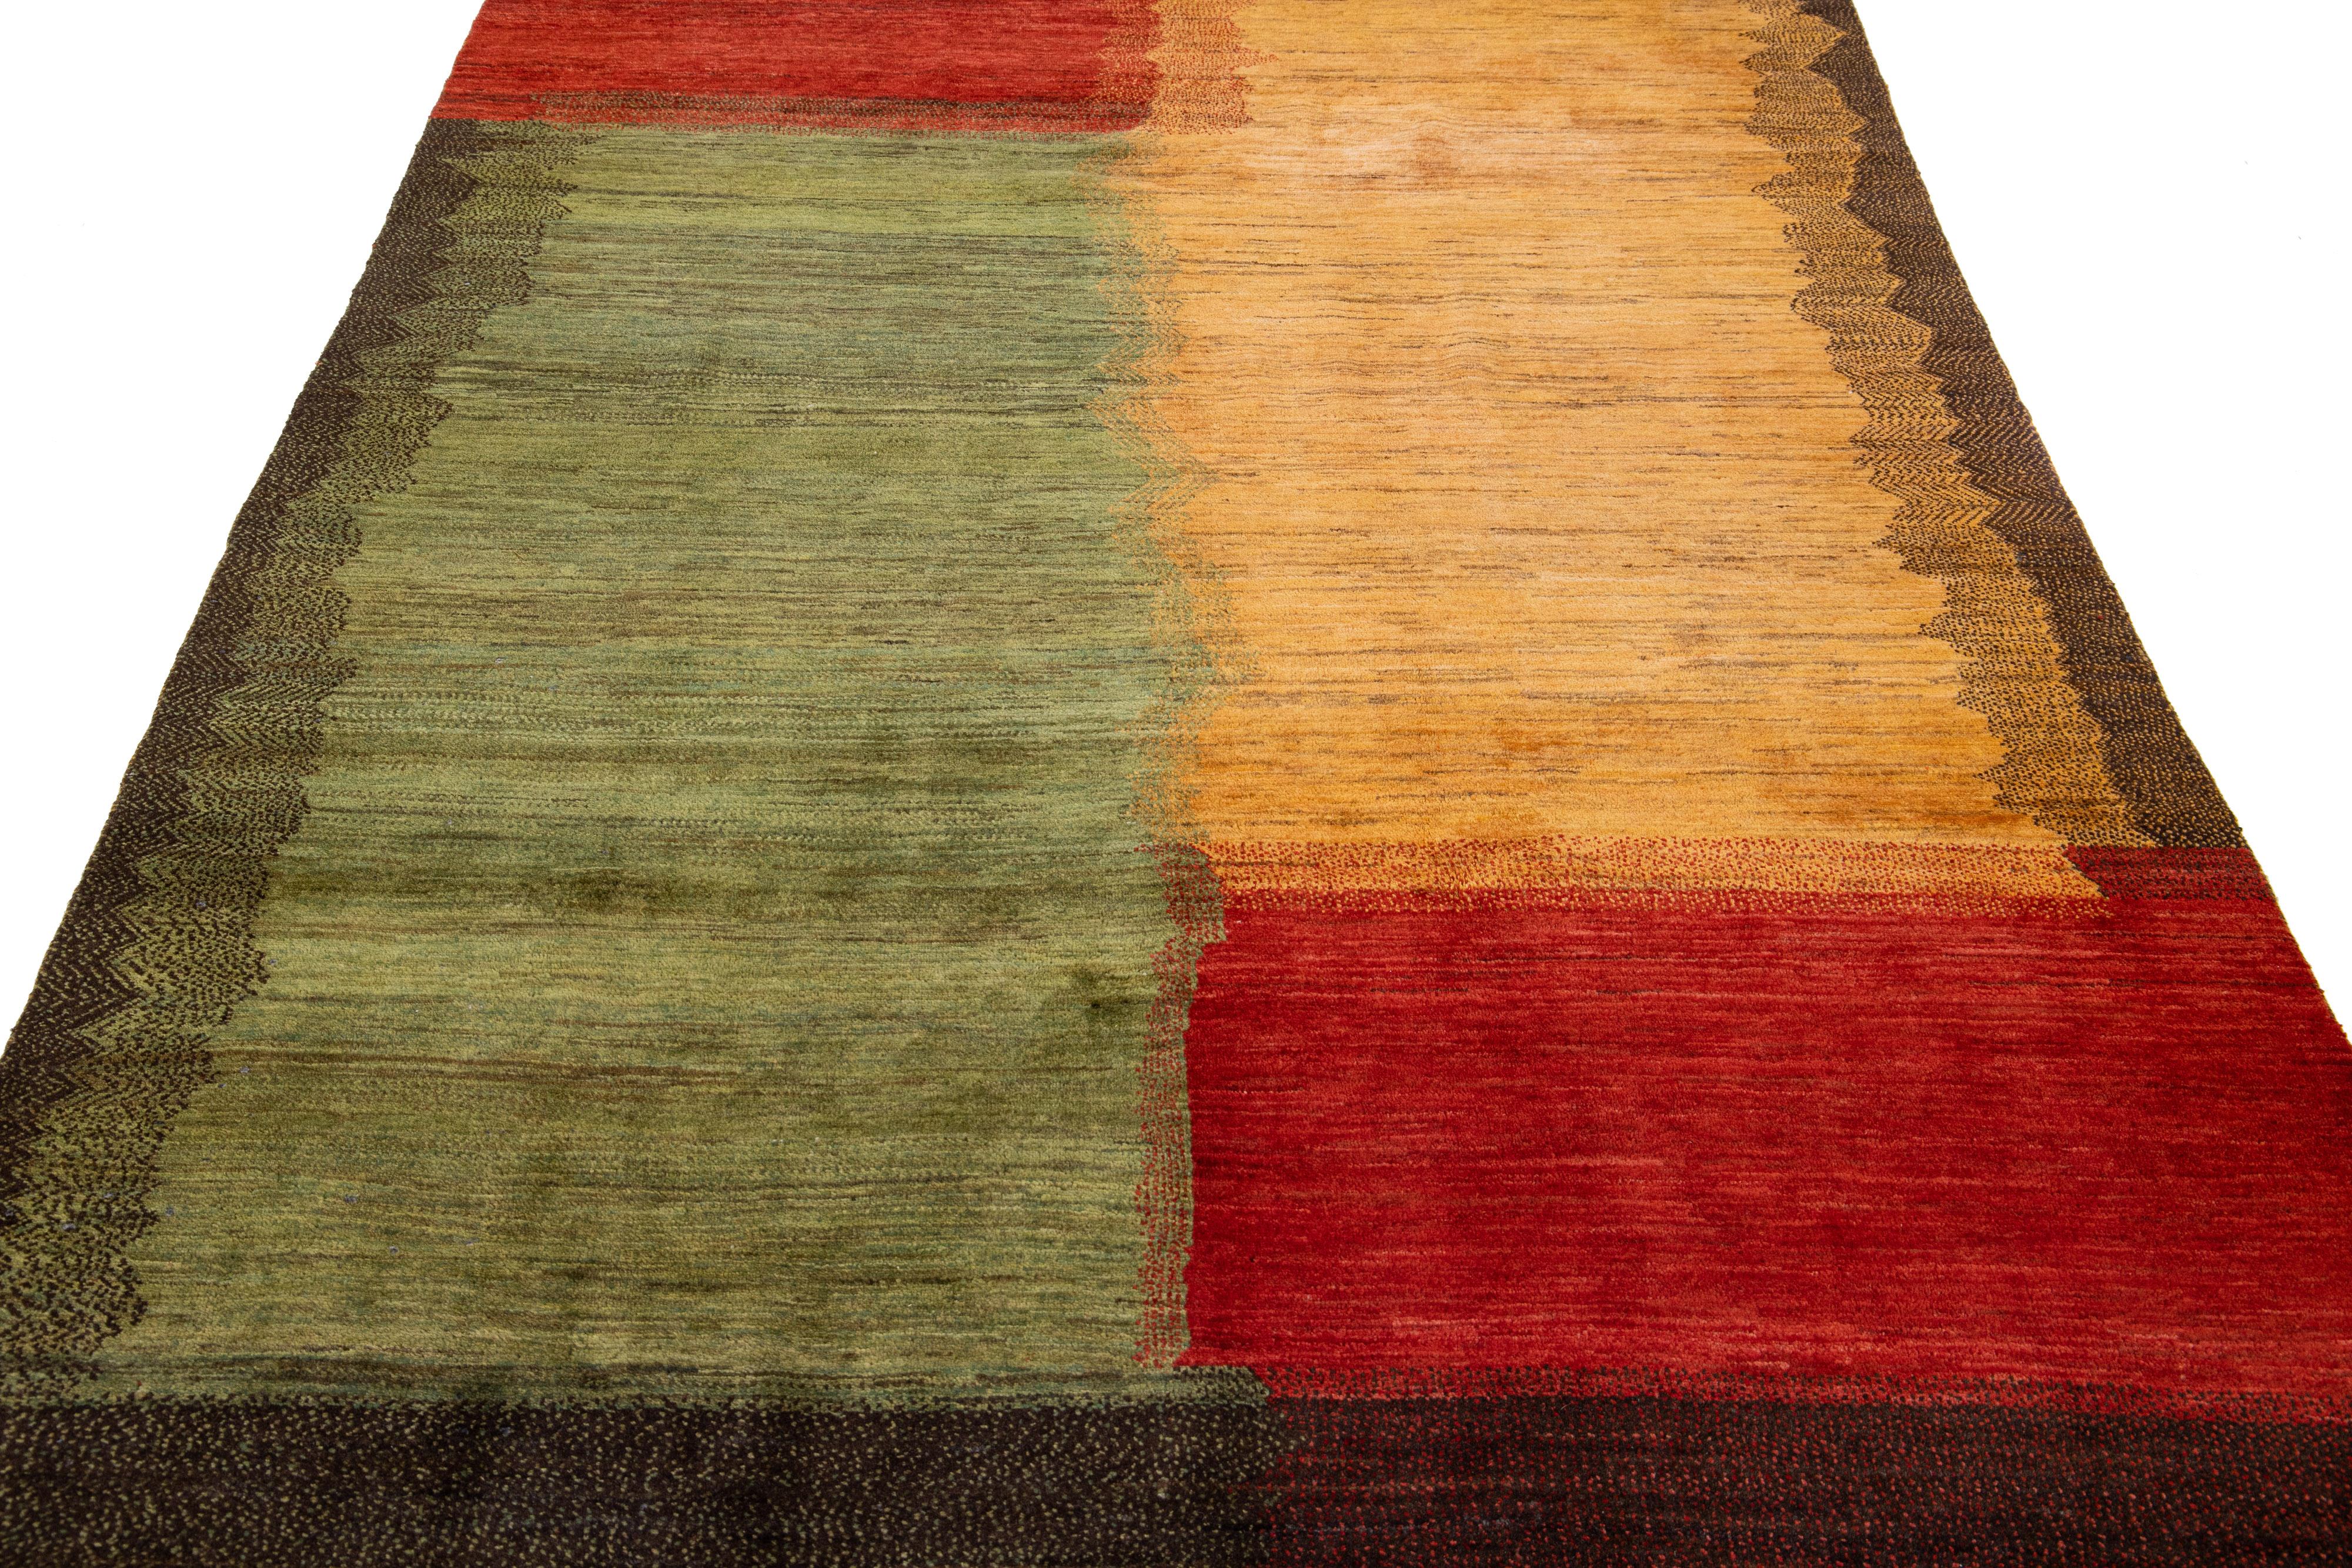 Beautiful modern Gabbeh-style hand-woven wool rug with a green, red, goldenrod, and brown color field and gorgeous abstract design.

This rug measures: 5'7